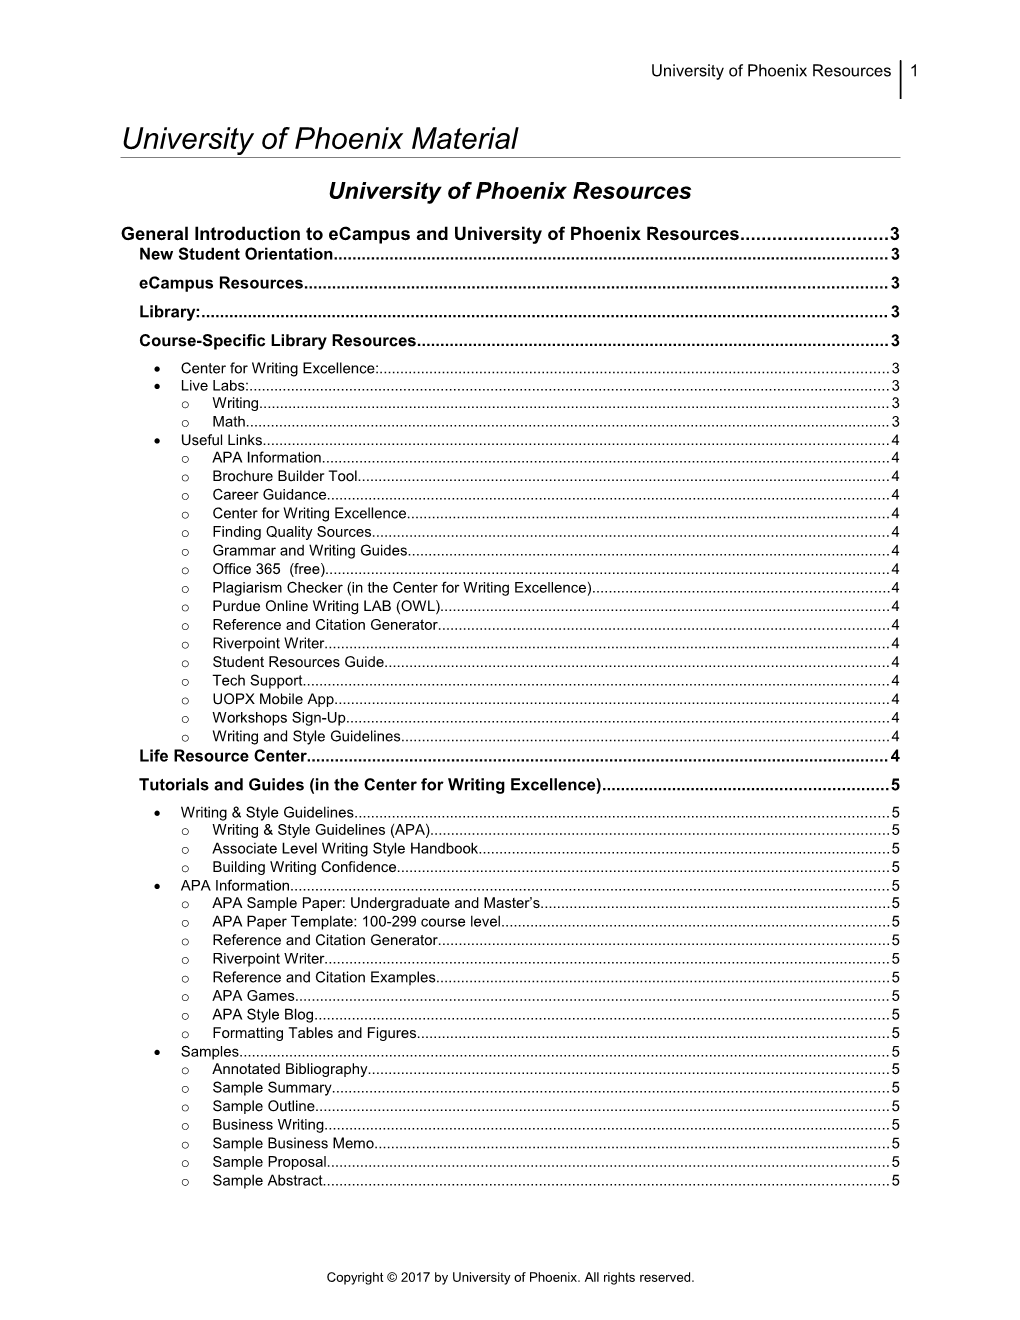 General Introduction to Ecampus and University of Phoenix Resources 3